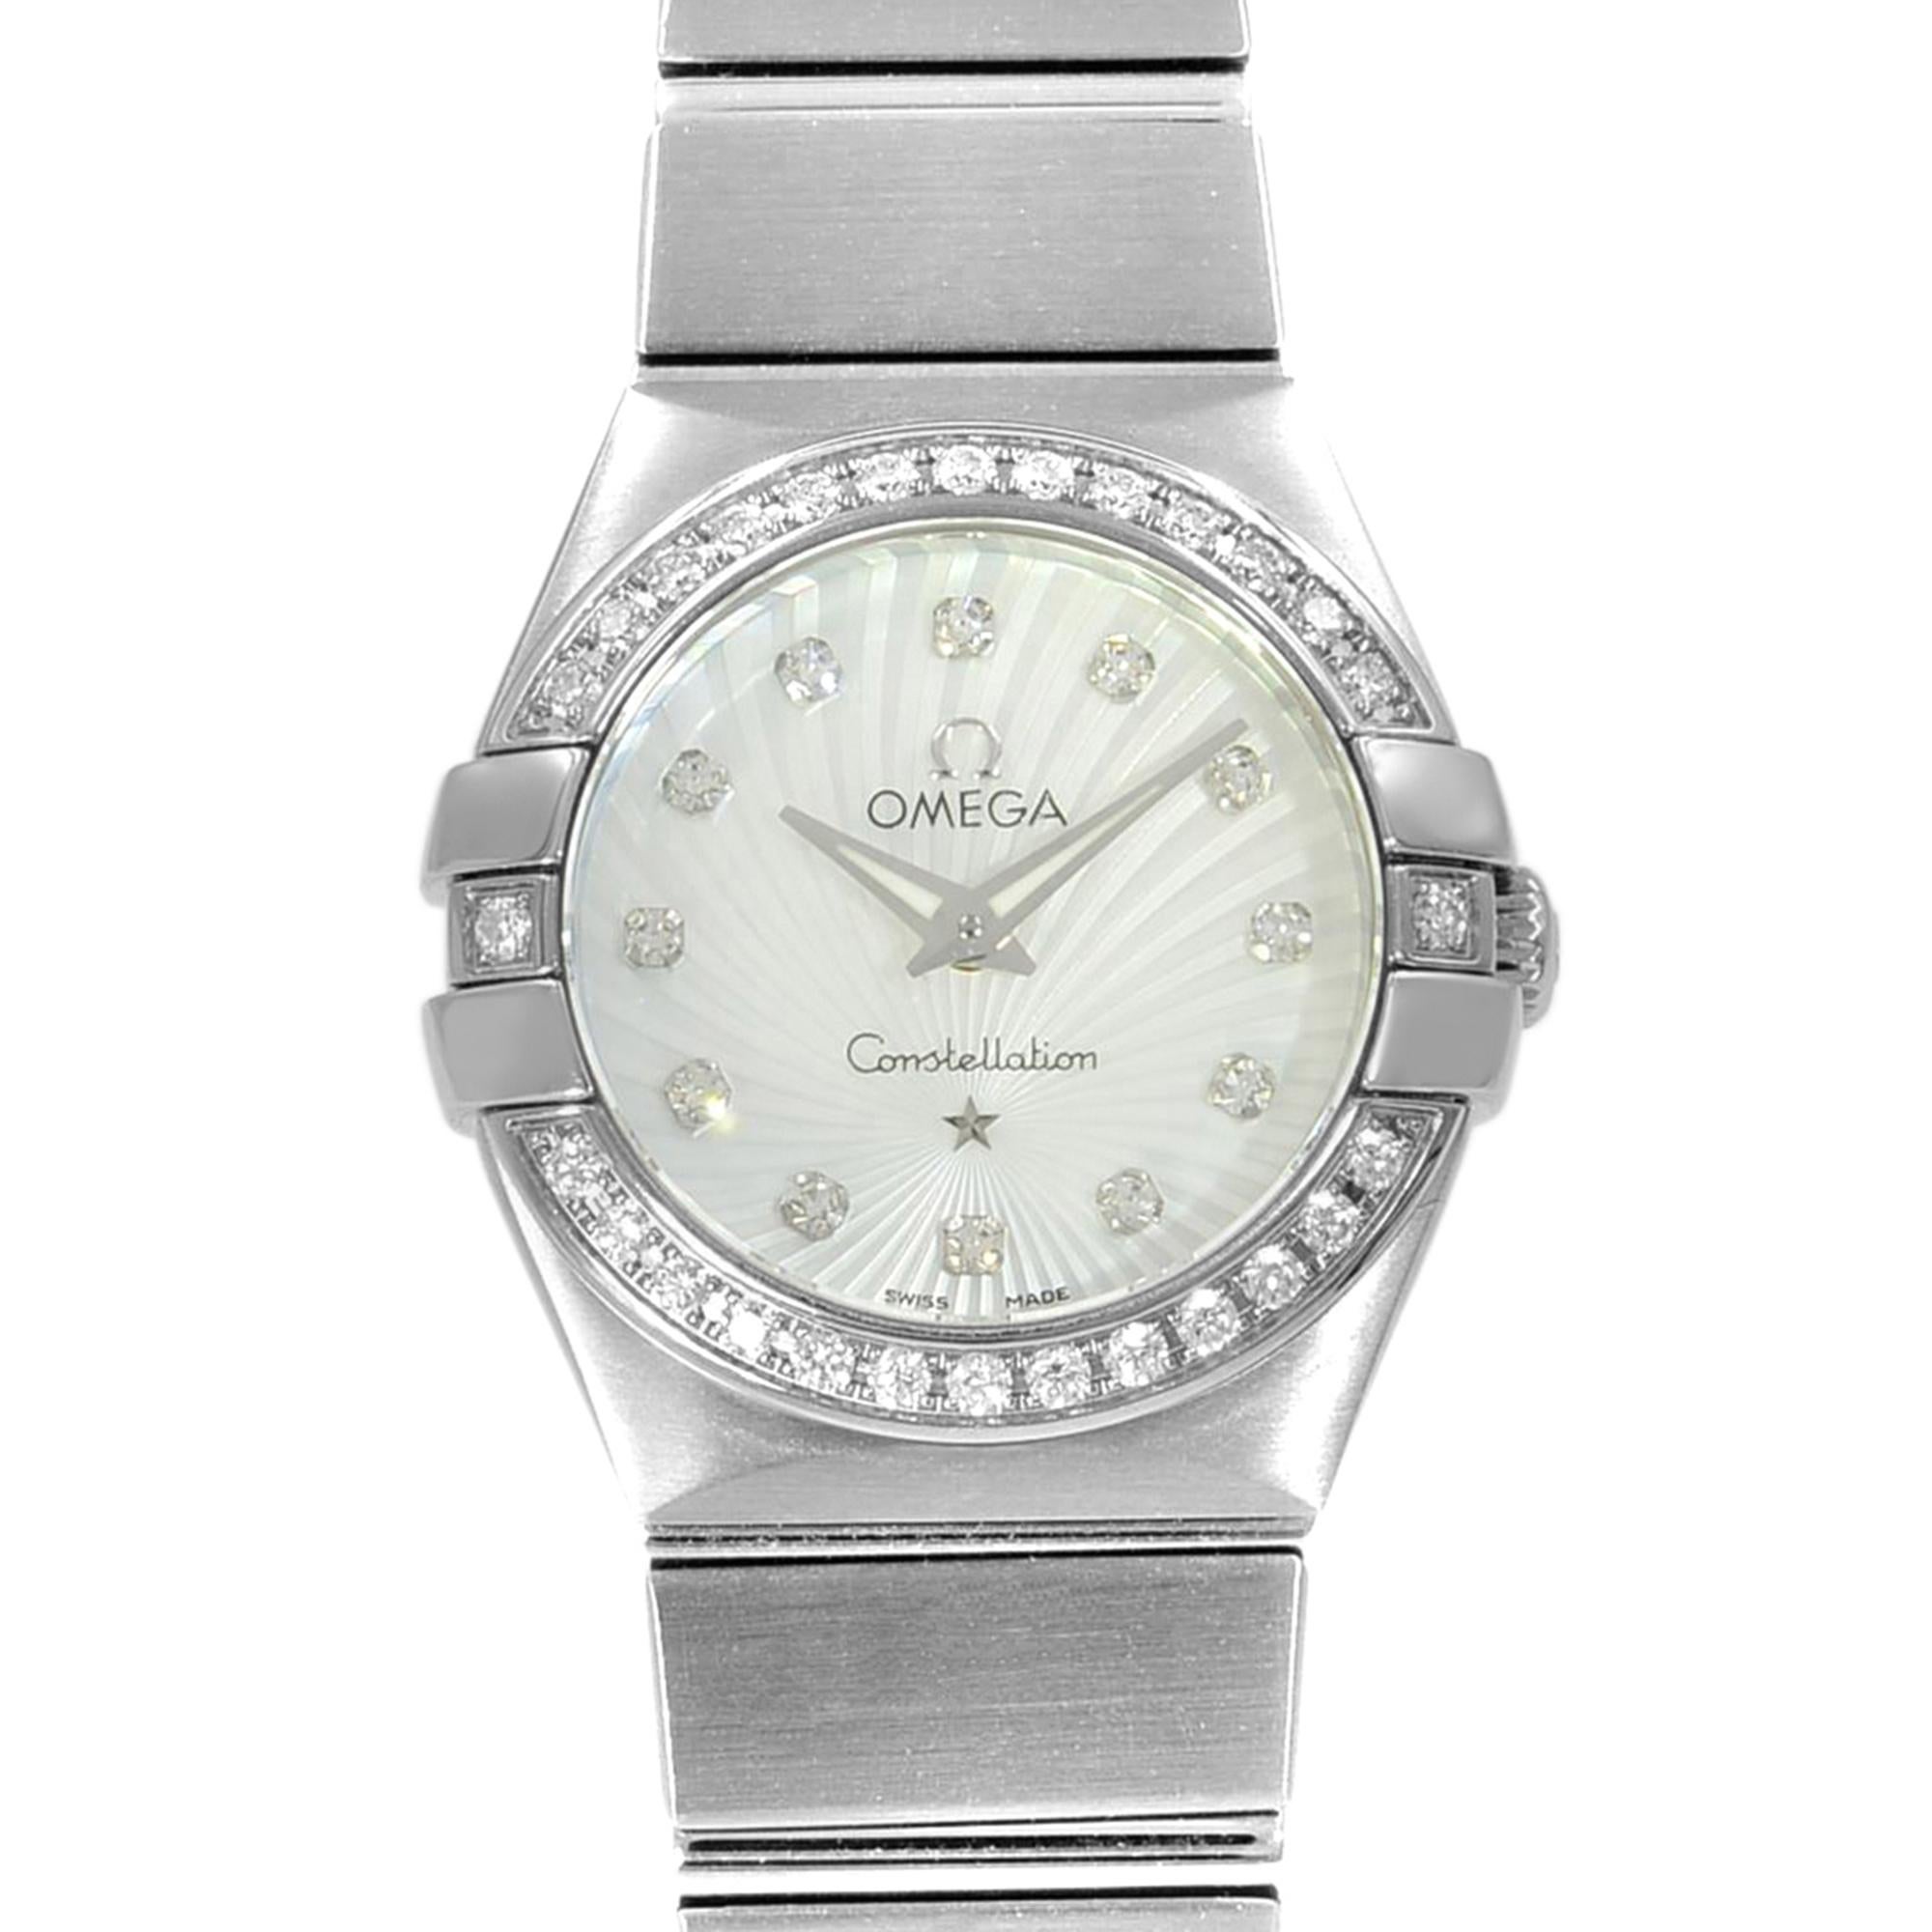 This display model Omega Constellation  123.15.24.60.55.002 is a beautiful Ladies timepiece that is powered by a quartz movement which is cased in a stainless steel case. It has a round shape face, diamonds dial and has hand diamonds style markers.